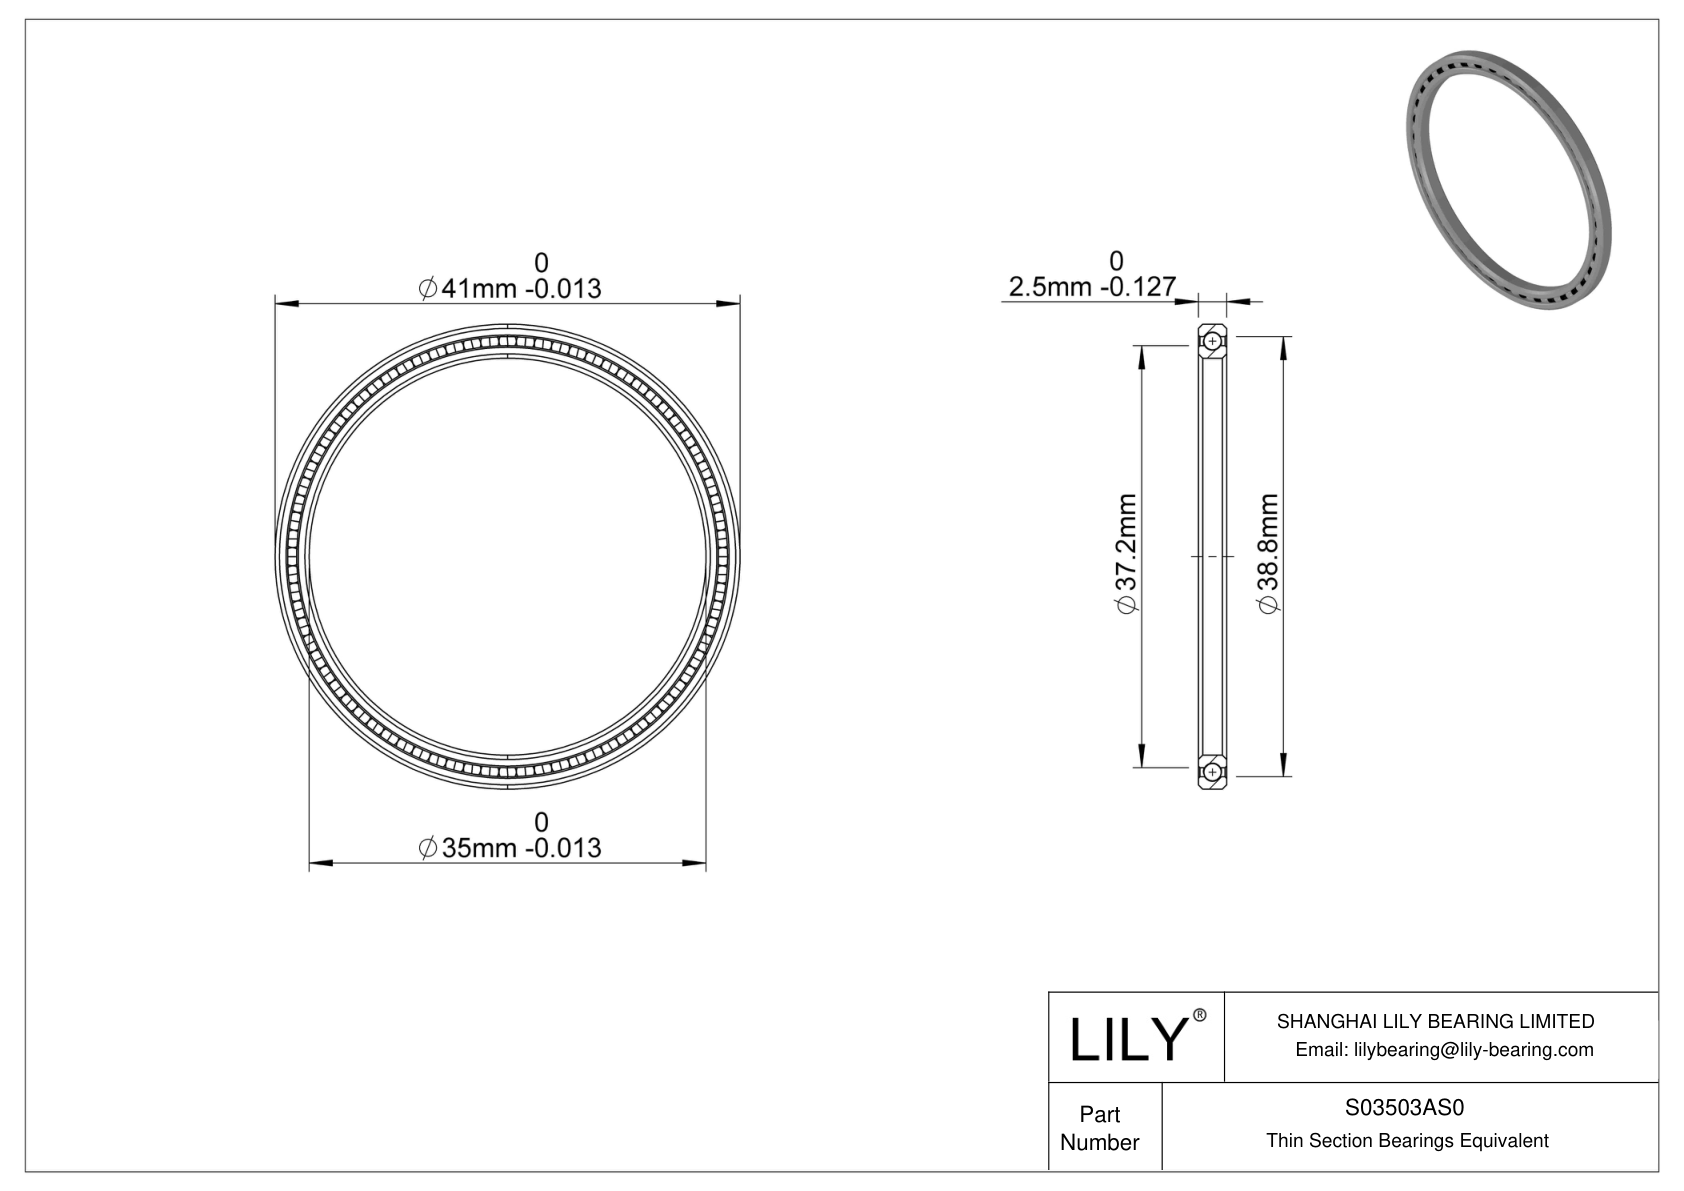 S03503AS0 Constant Section (CS) Bearings cad drawing